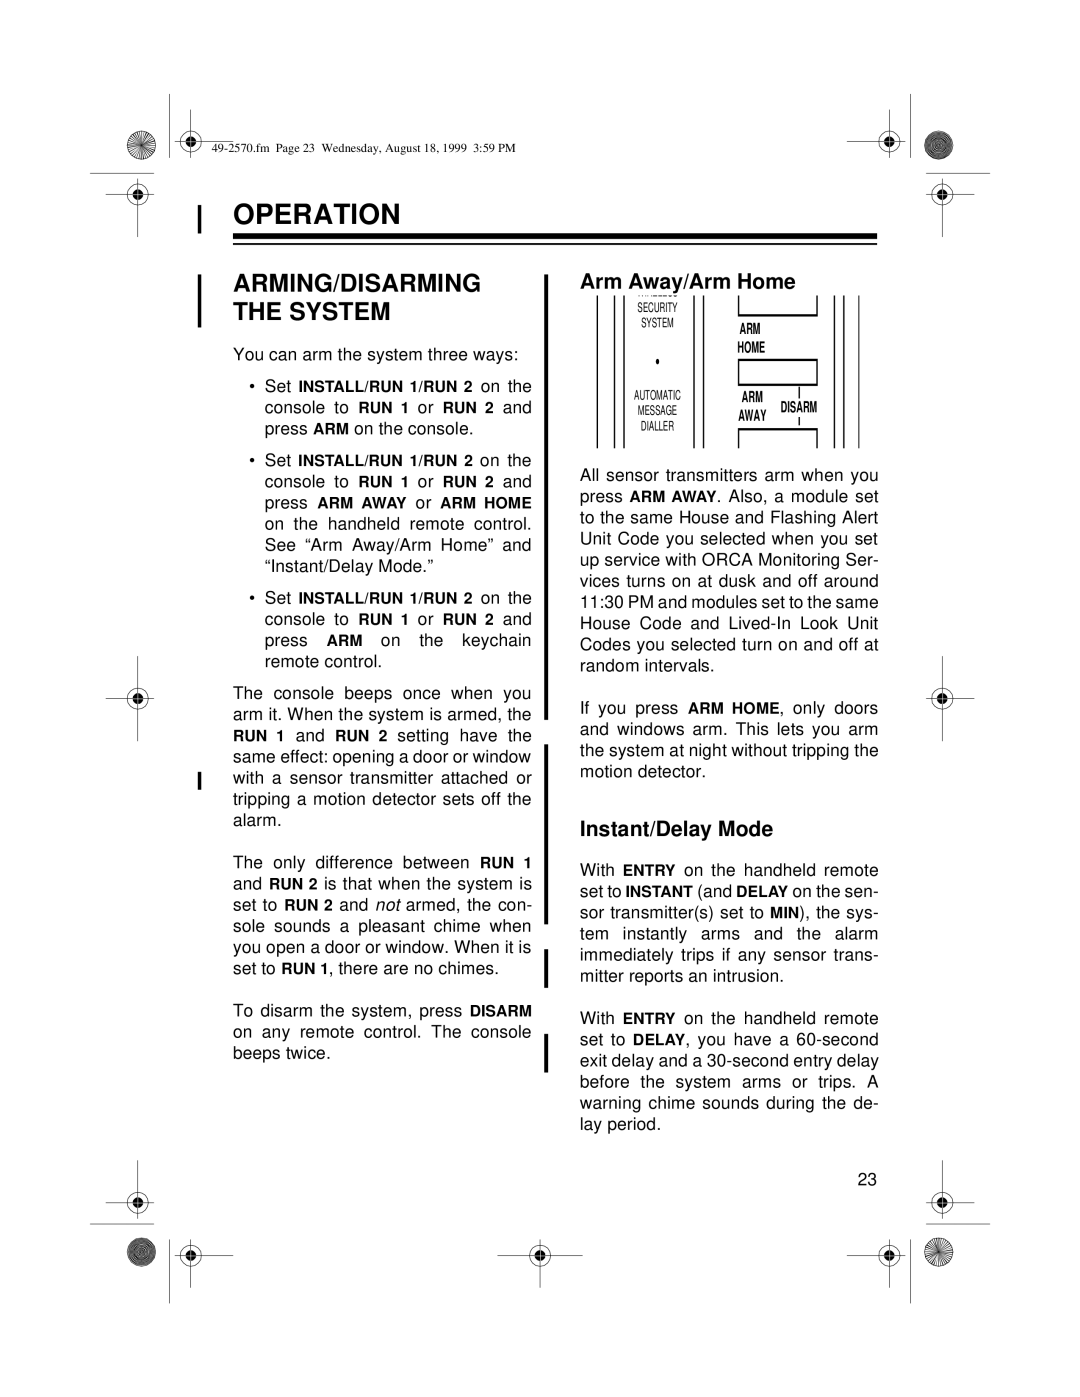 Radio Shack 49-2570 owner manual Operation, Arming/Disarming The System, Arm Away/Arm Home, Instant/Delay Mode 